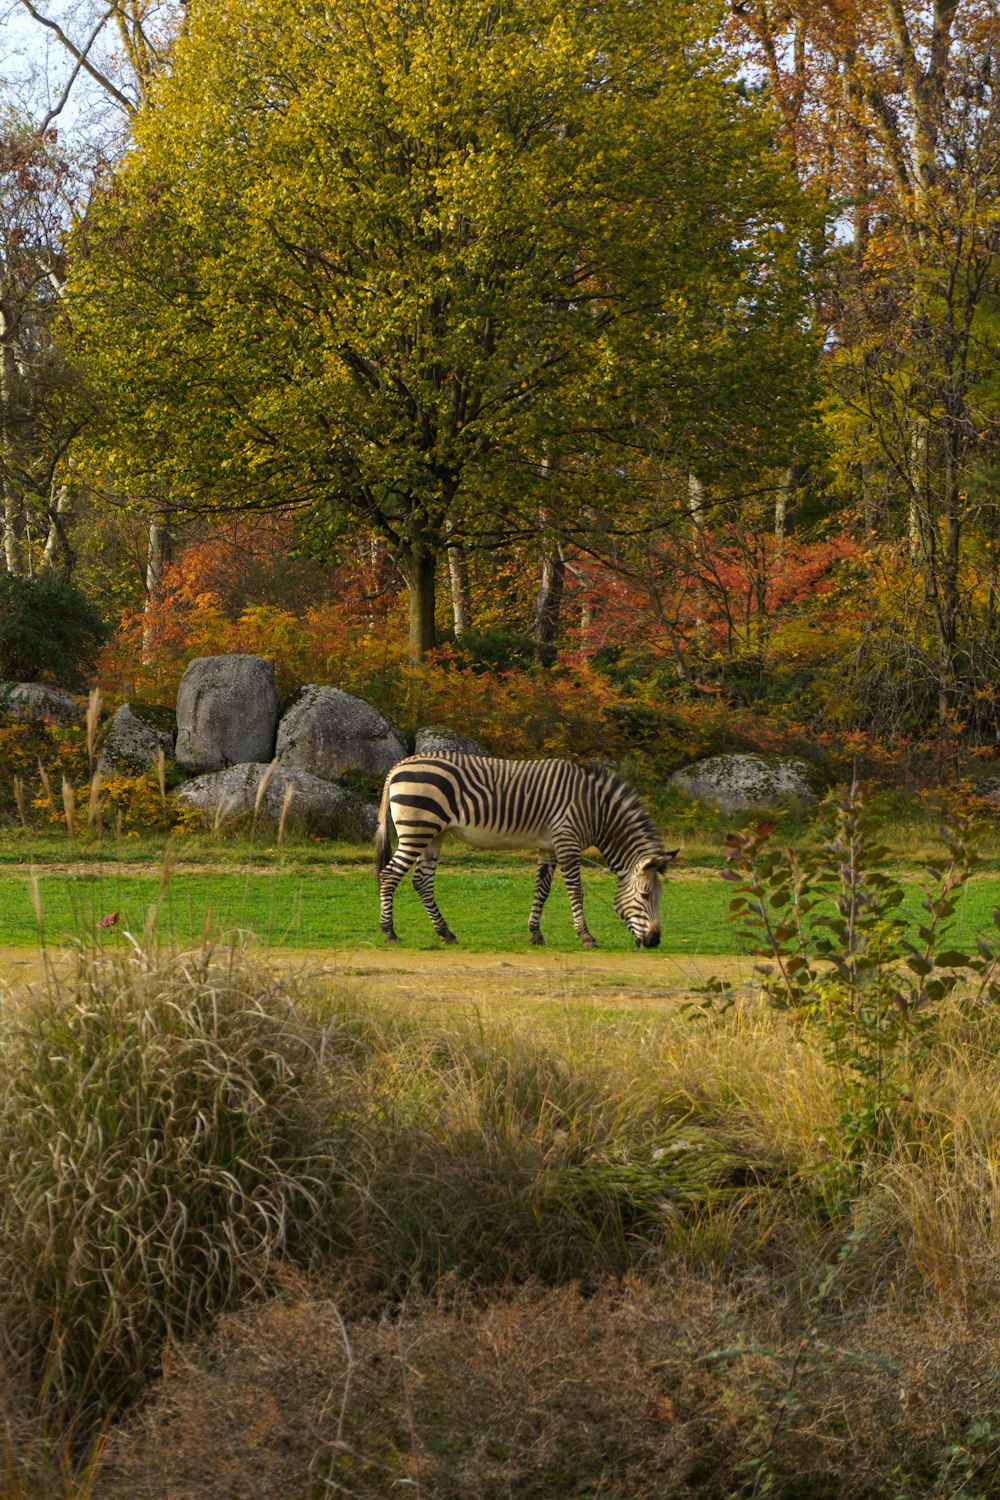 a zebra grazing in a grassy field with trees in the background